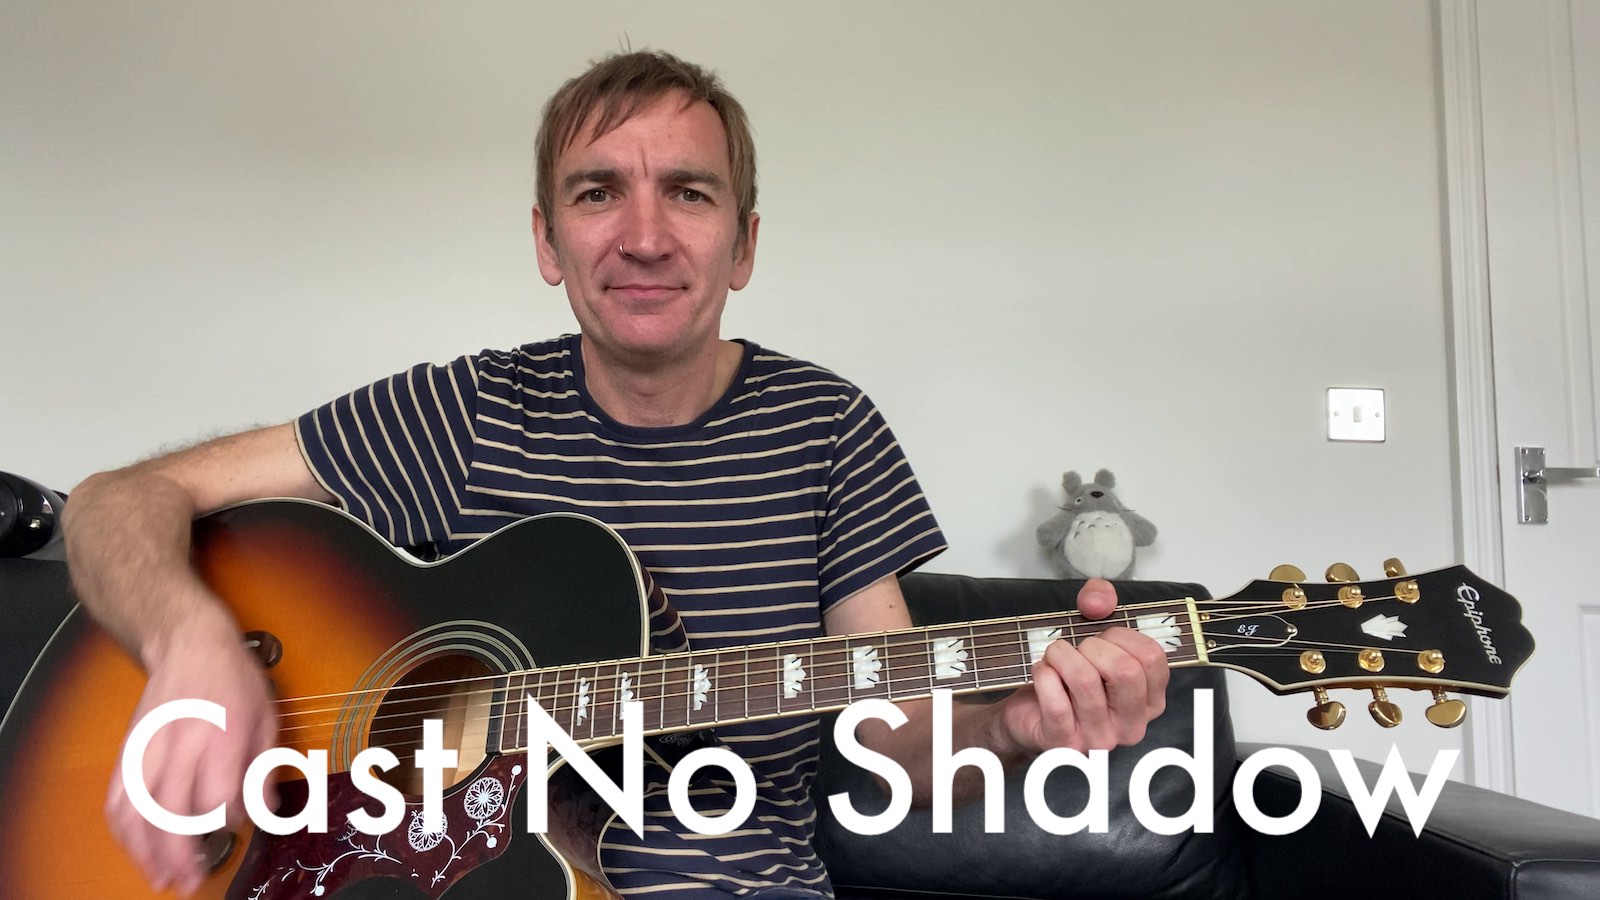 Cast No Shadow (Oasis) acoustic cover by Andy Starkey